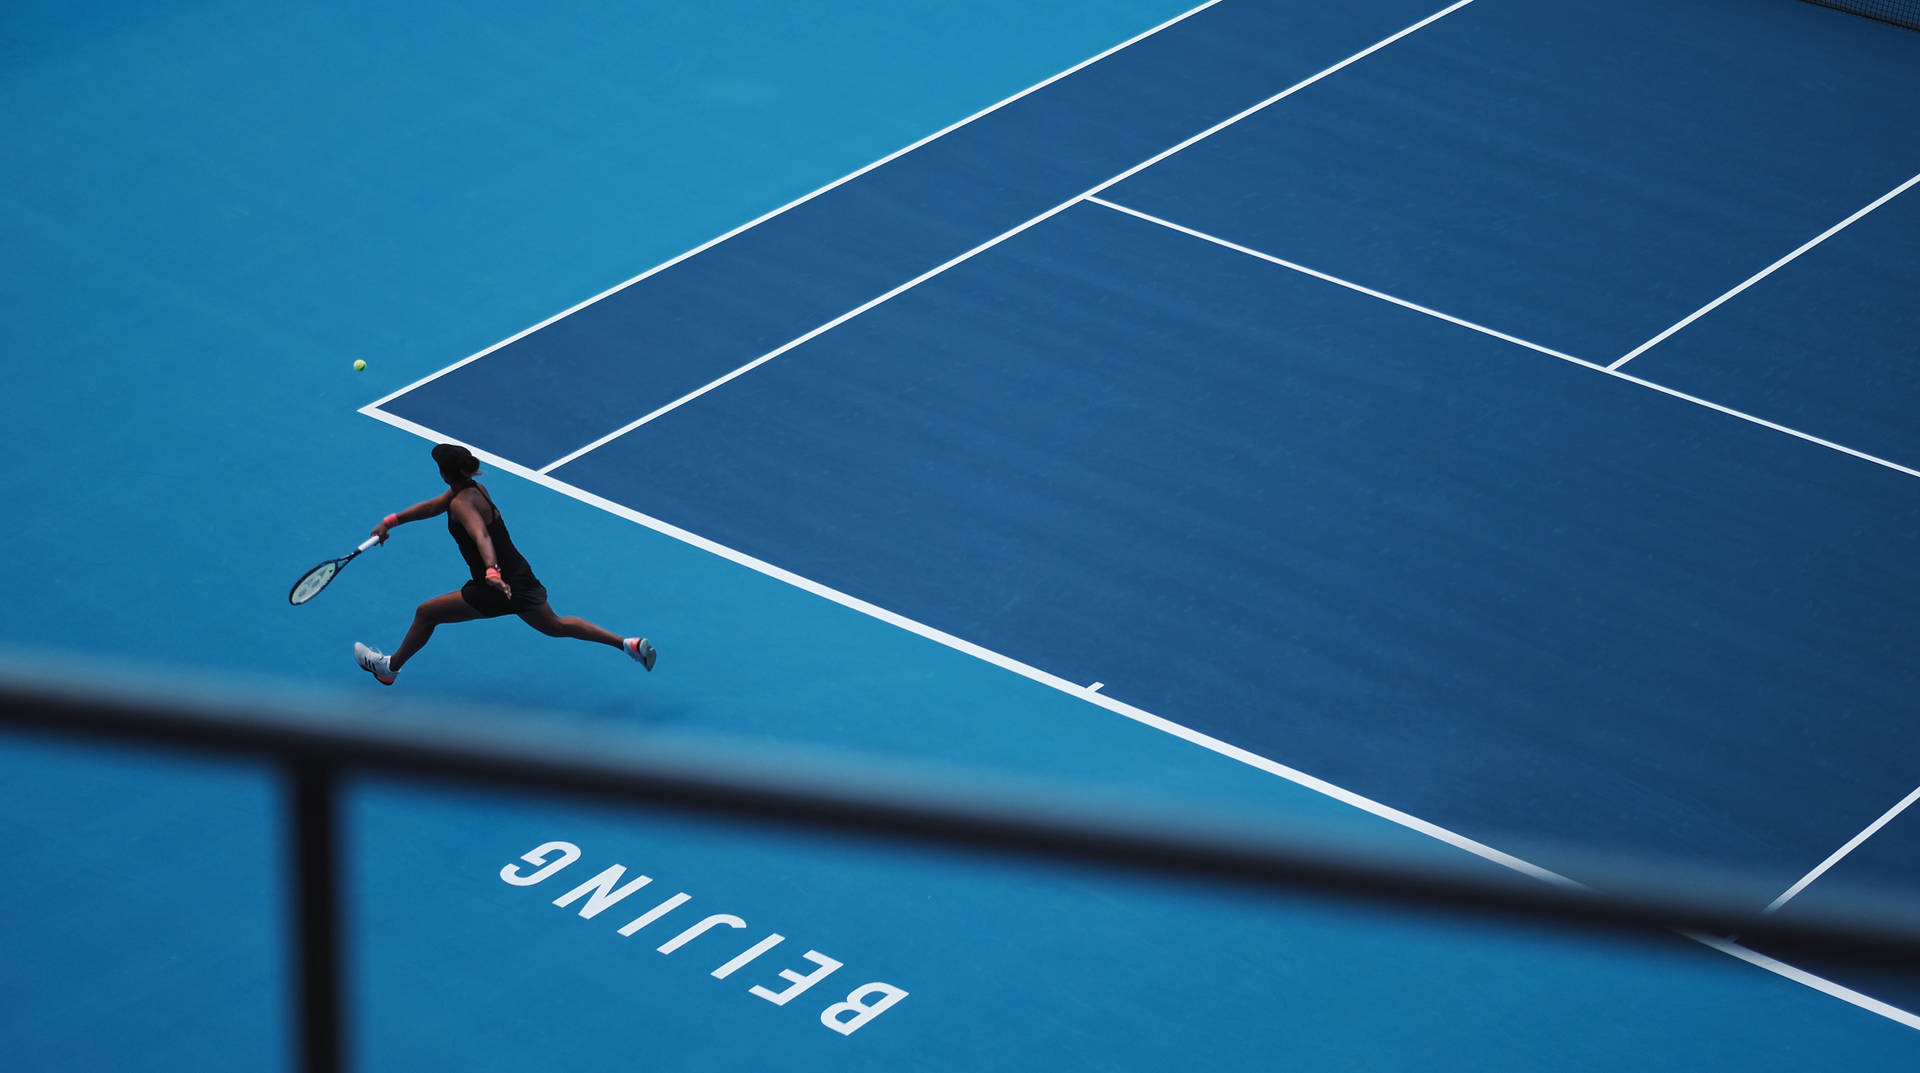 Tennis 5343X2987 Wallpaper and Background Image